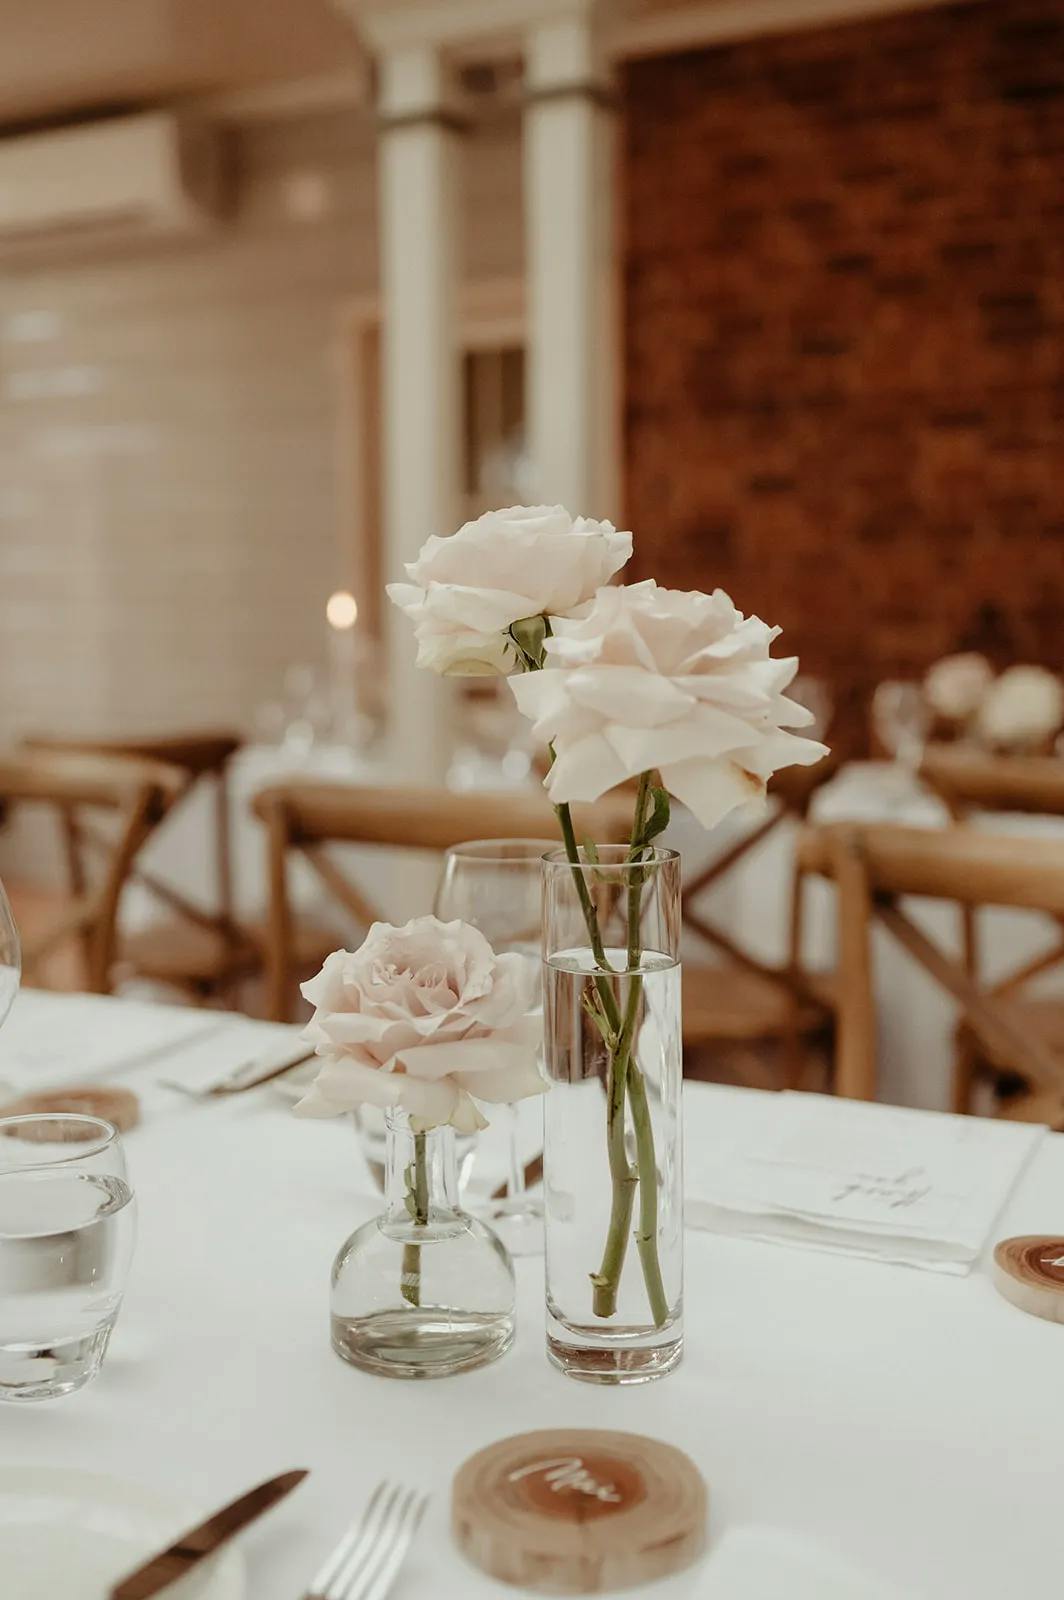 A table decorated with two vases holding light pink roses, one taller and one shorter. The table is set with glassware, white plates, and small wooden place markers. The background features wooden chairs and a mix of brick and light-colored walls.